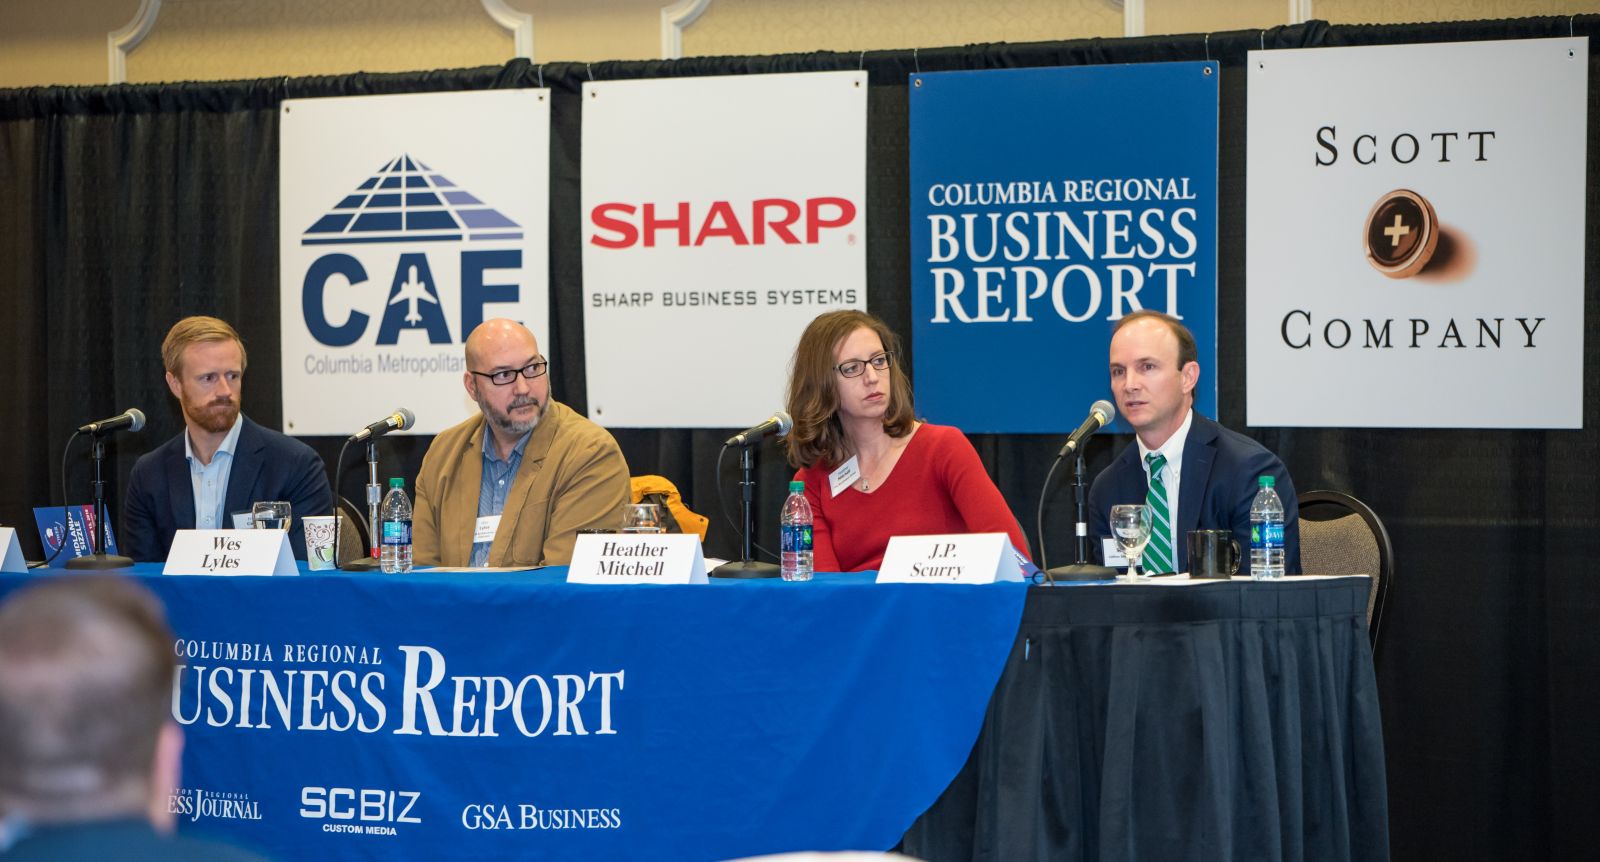 Power Breakfast panelists (left to right) Frank Cason, Wes Lyles, Heather Mitchell and J.P. Scurry discuss area growth opportunities and challenges. (Photo/Kathy Allen)